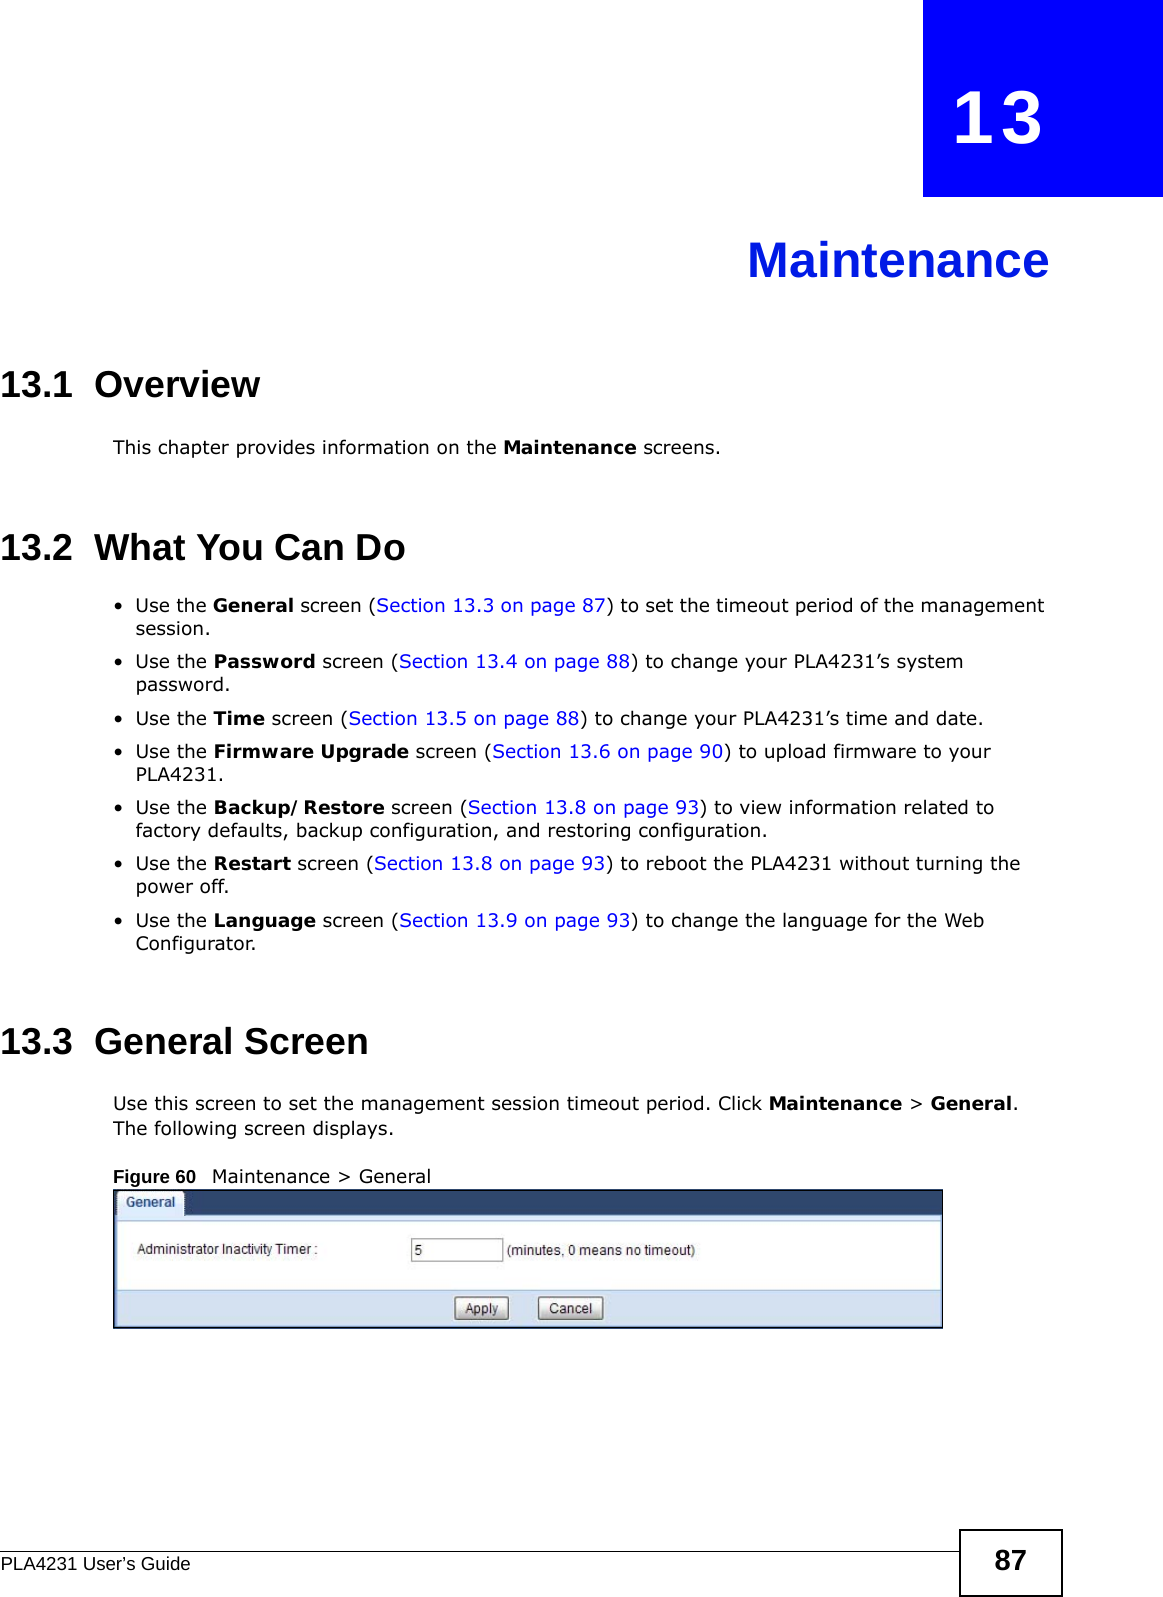 PLA4231 User’s Guide 87CHAPTER   13Maintenance13.1  OverviewThis chapter provides information on the Maintenance screens. 13.2  What You Can Do•Use the General screen (Section 13.3 on page 87) to set the timeout period of the management session. •Use the Password screen (Section 13.4 on page 88) to change your PLA4231’s system password.•Use the Time screen (Section 13.5 on page 88) to change your PLA4231’s time and date.•Use the Firmware Upgrade screen (Section 13.6 on page 90) to upload firmware to your PLA4231.•Use the Backup/Restore screen (Section 13.8 on page 93) to view information related to factory defaults, backup configuration, and restoring configuration.•Use the Restart screen (Section 13.8 on page 93) to reboot the PLA4231 without turning the power off.•Use the Language screen (Section 13.9 on page 93) to change the language for the Web Configurator.13.3  General Screen Use this screen to set the management session timeout period. Click Maintenance &gt; General. The following screen displays.Figure 60   Maintenance &gt; General 